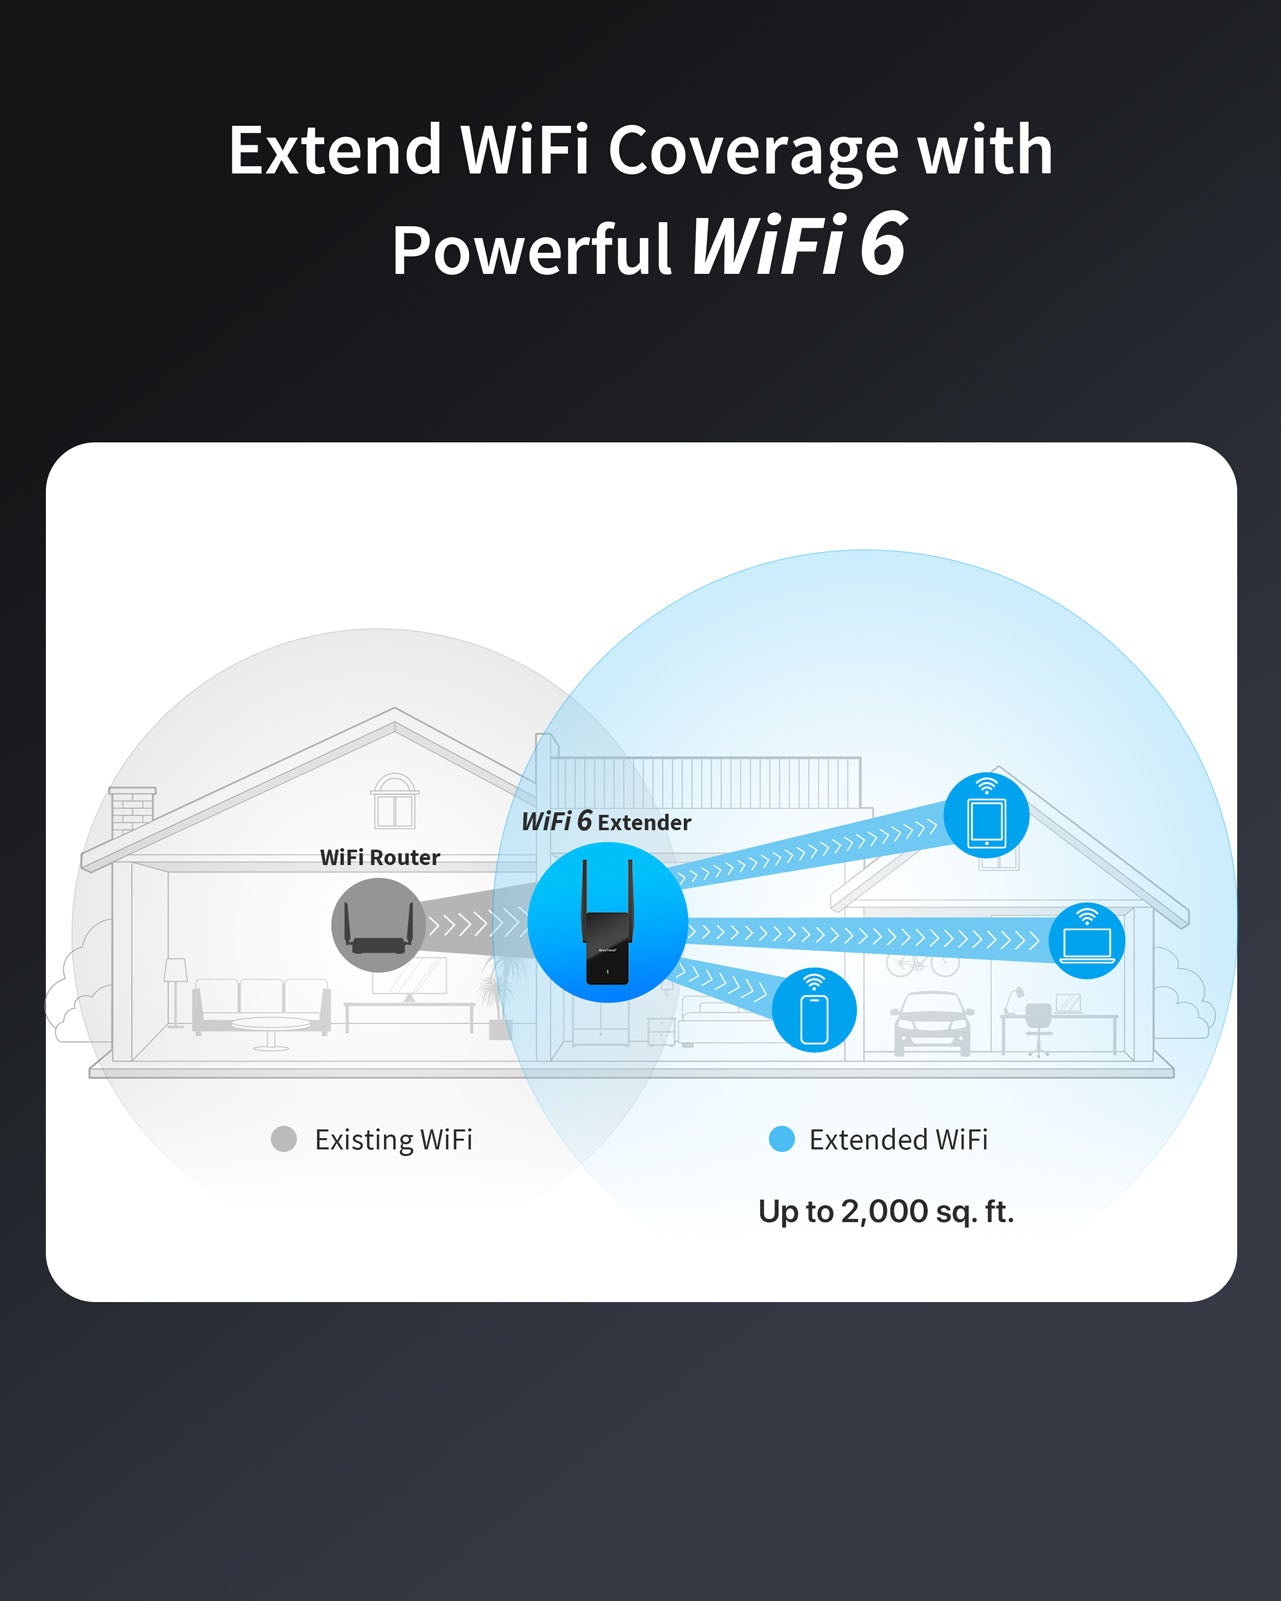 1500 Mbps WiFi 6 Extender Connects to Your WiFi Routers and Extends WiFi Coverage to Up to 2000 Square Feet